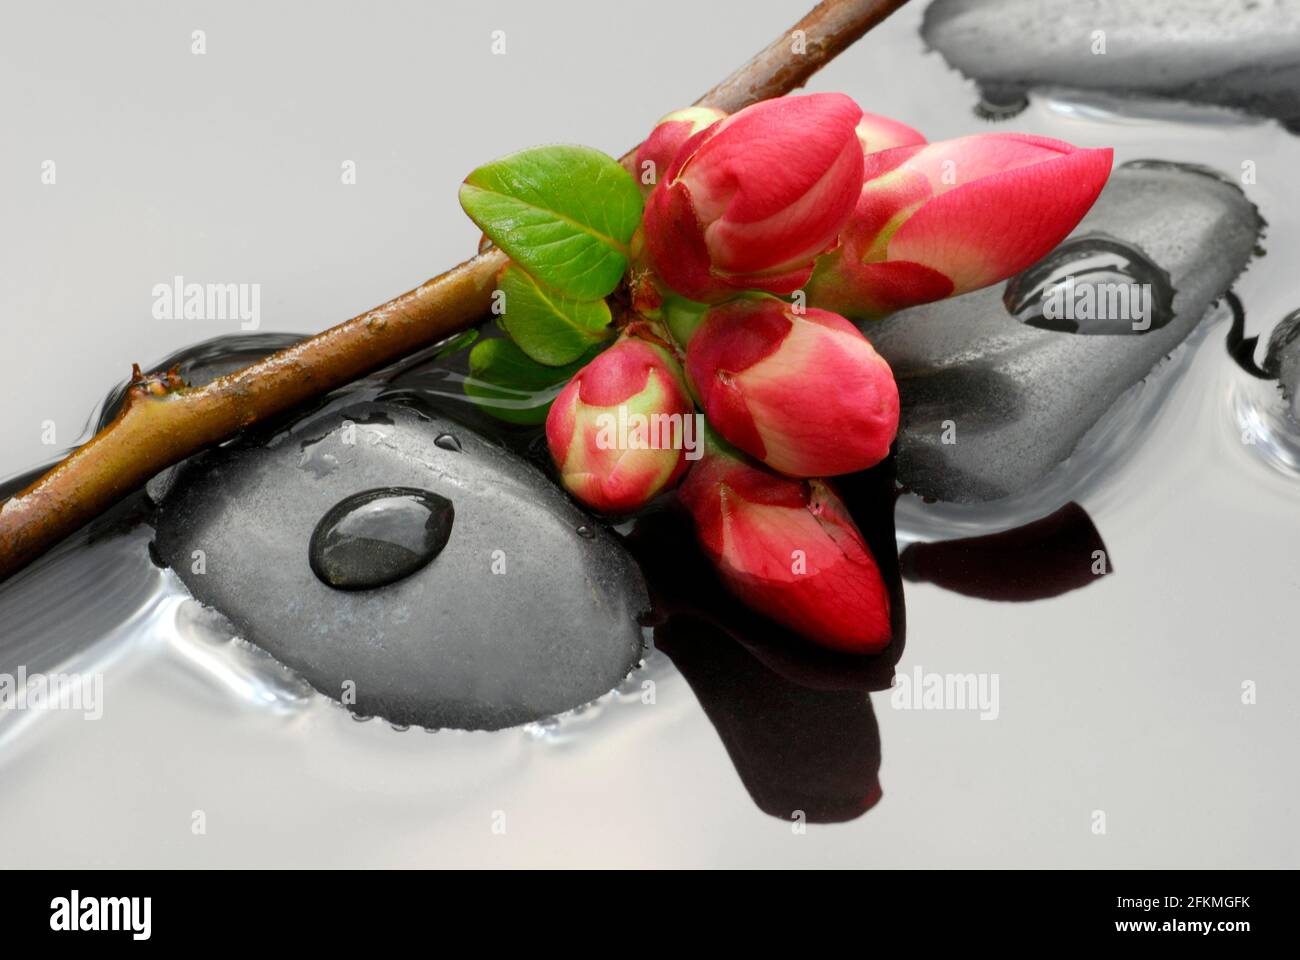 Chaenomeles japonica (Chaenomeles japonica), branch with flowers on stones in water, plum blossoms, blood plum Stock Photo